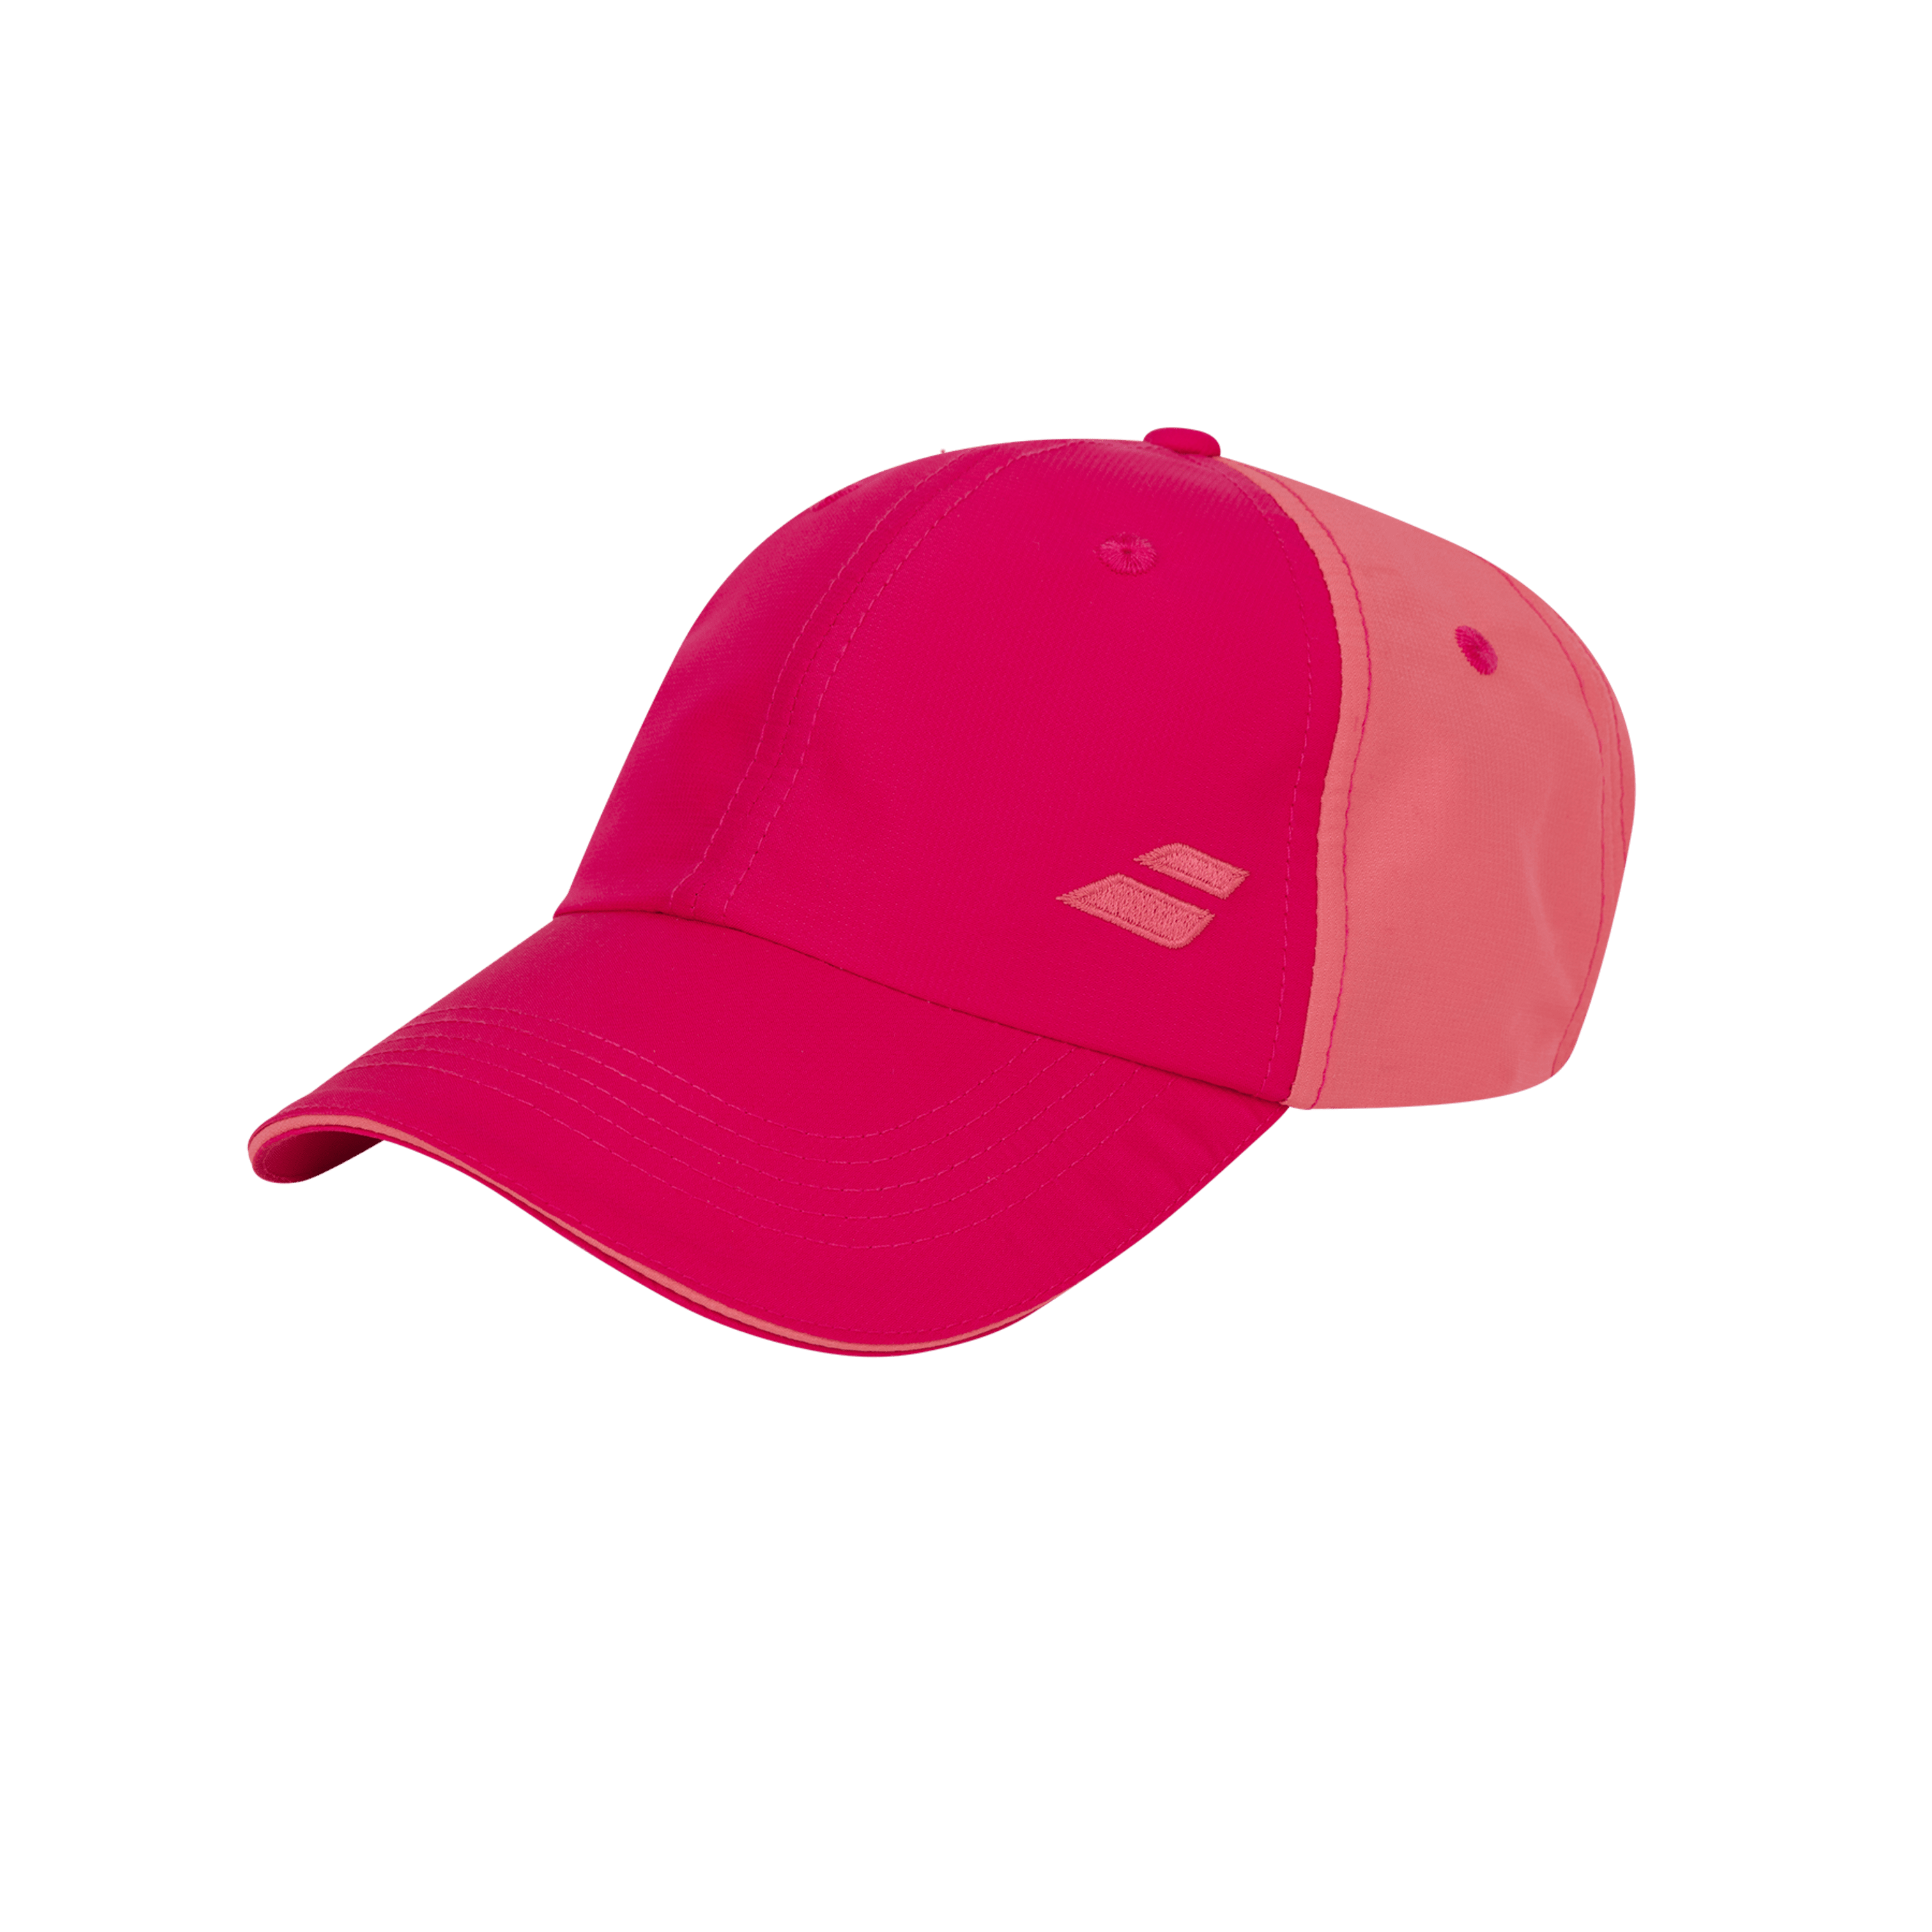 Unisex Babolat cap, one size fits most in pink color